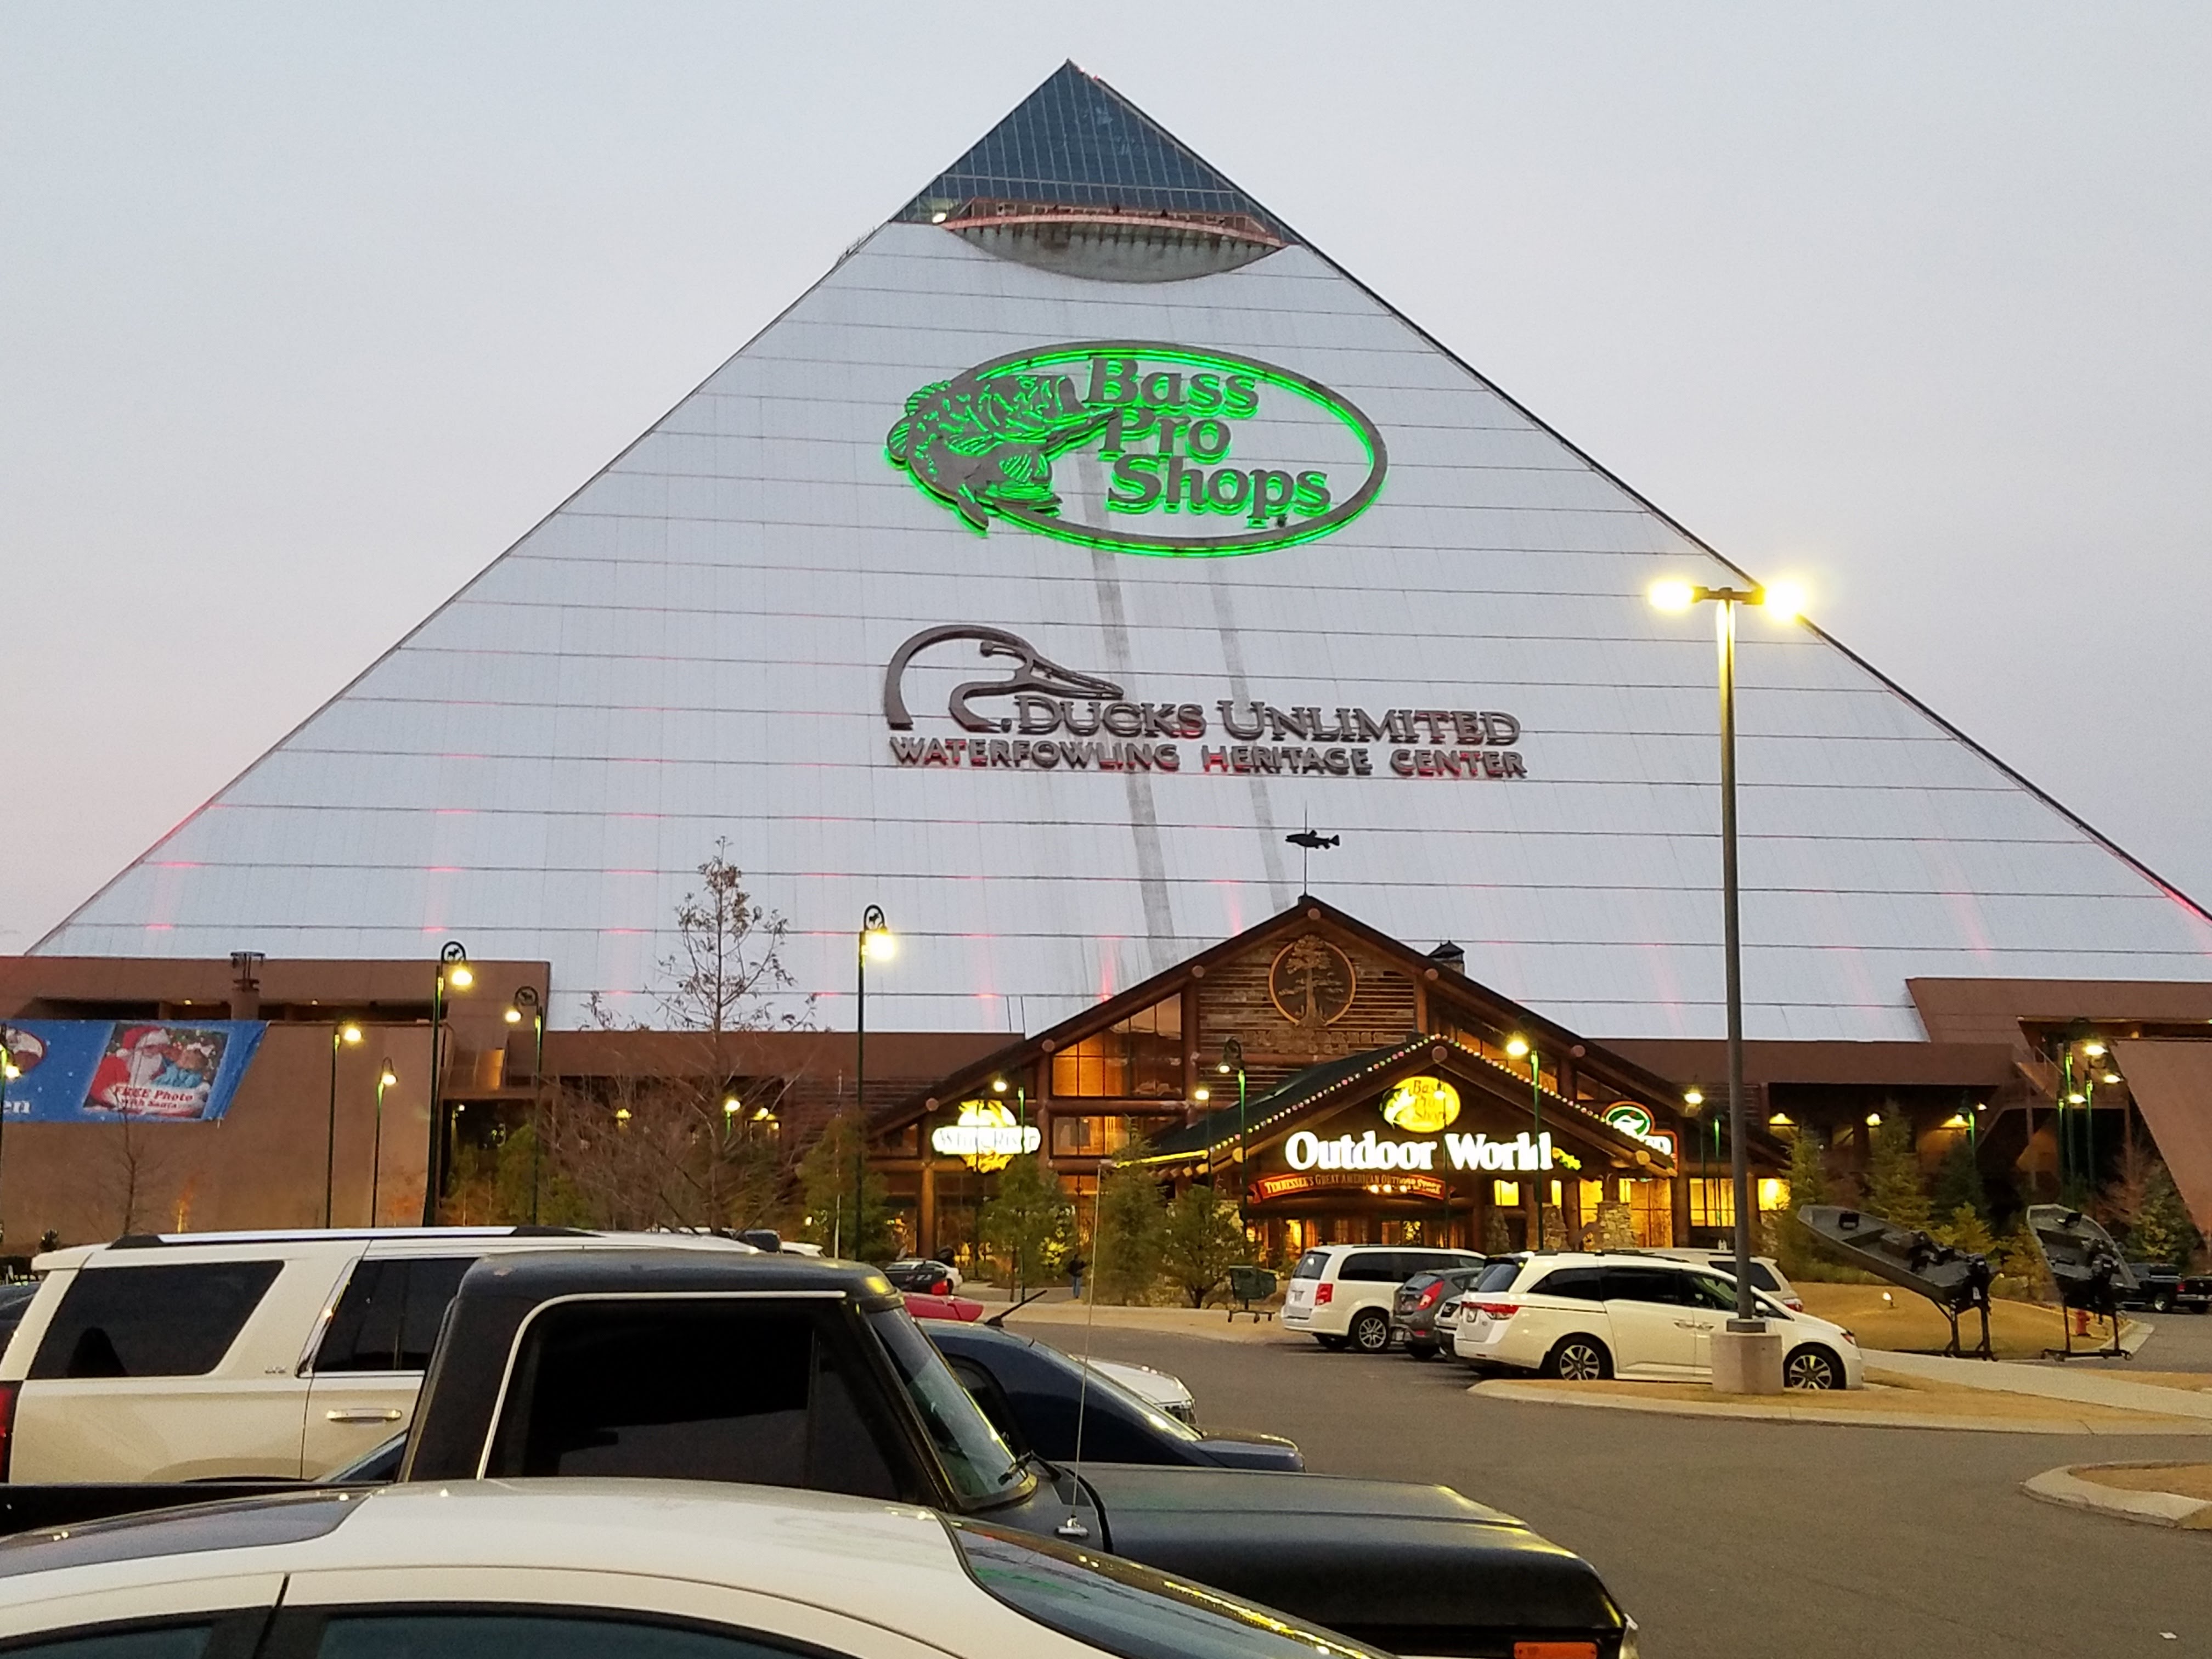 Bass Pro Shops, Malls and Retail Wiki